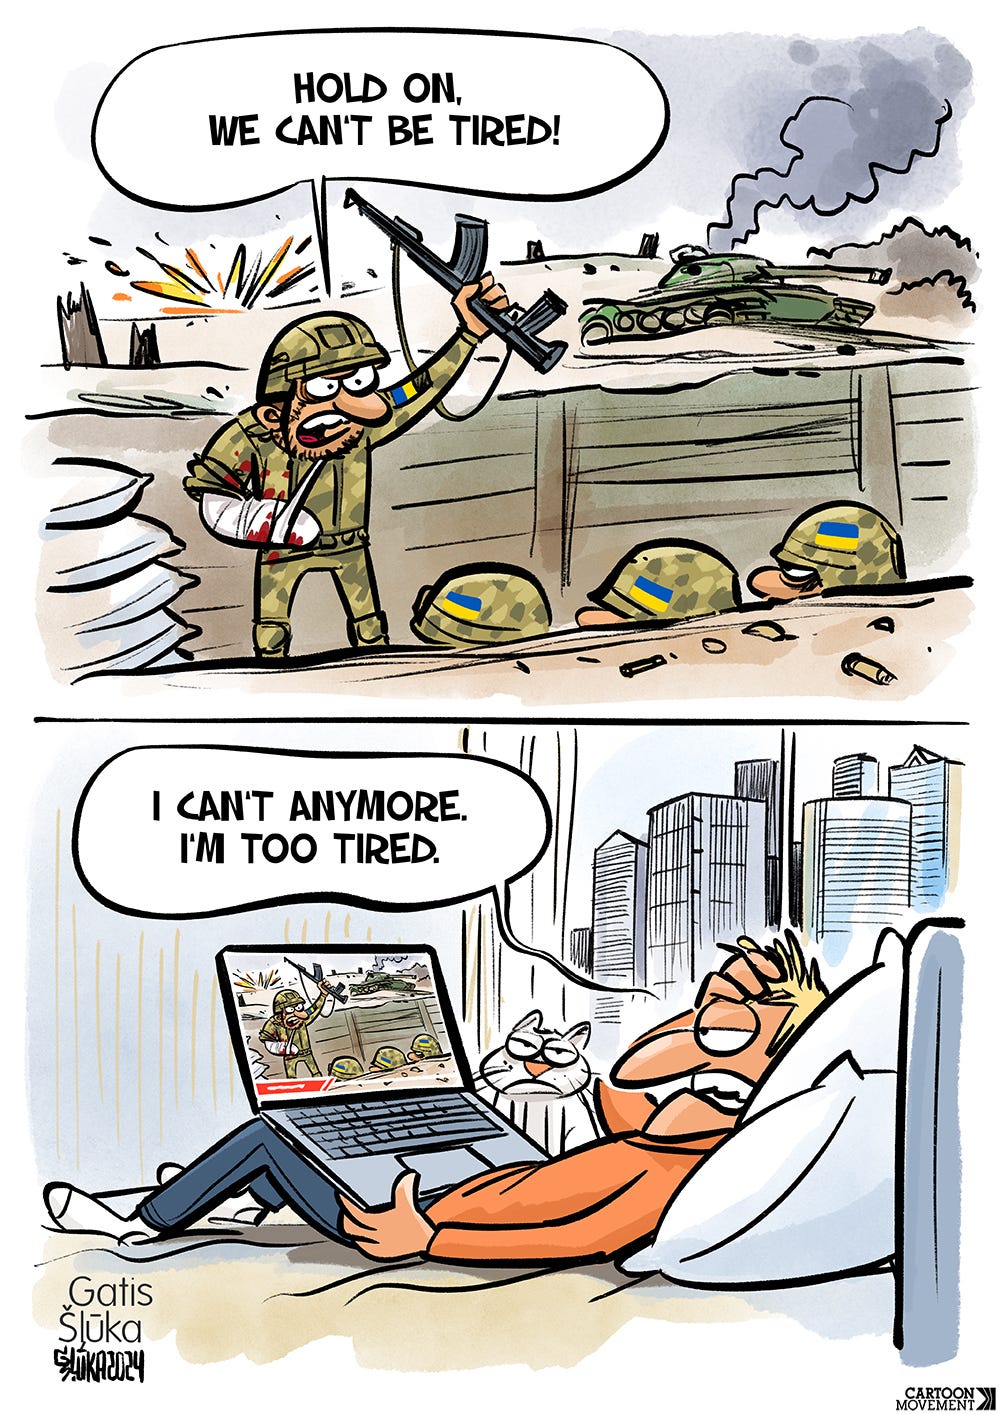 Two panel cartoon. The first panel shows a wounded Ukrainian solider in a trench motivating his fellow soldiers, saying 'Hold o,, we can't be tried!'. In the second panel we see a lazy guy lying on his bed looking at his laptop with a picture of the first panel on it, saying: 'I can't anymore. I'm too tired.